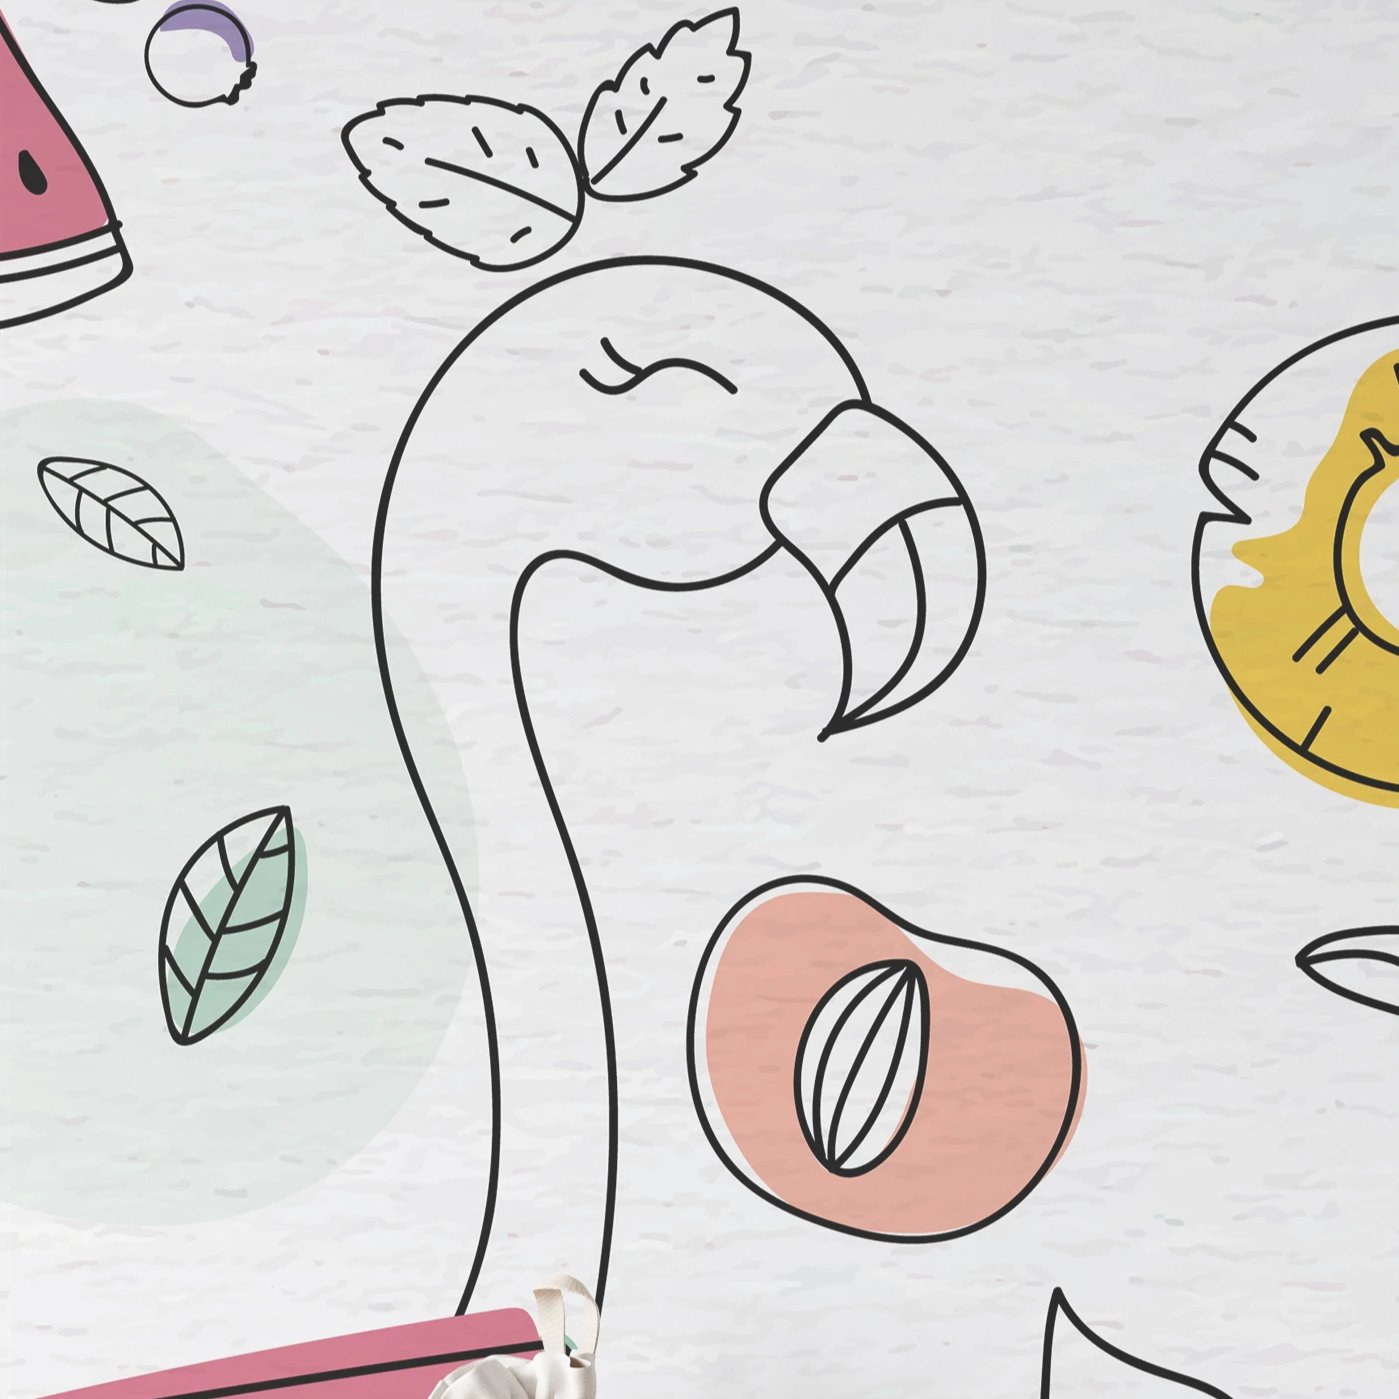 Playful children's room wallpaper featuring whimsical line drawings of various animals and fruits, such as a flamingo,